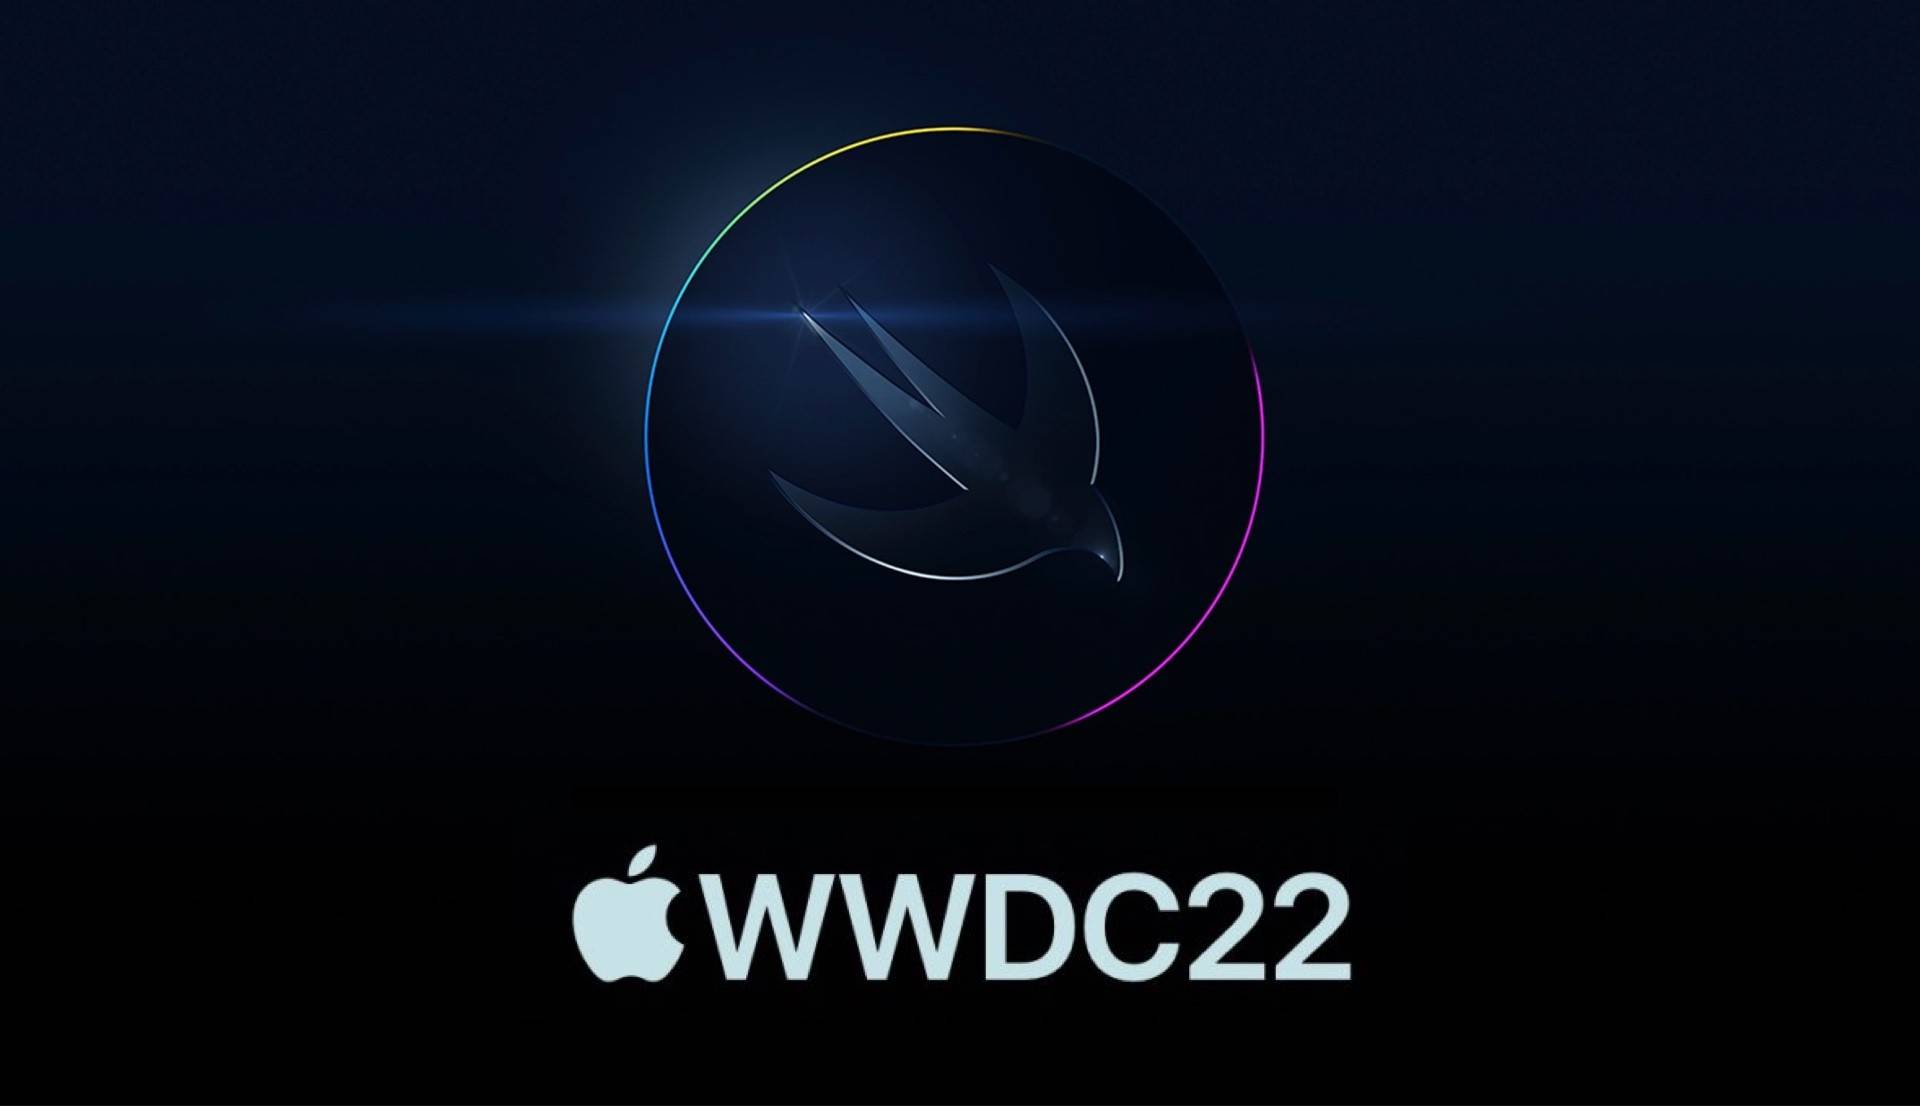 WWDC 2022: iOS 16, new Macs, and what else to expect